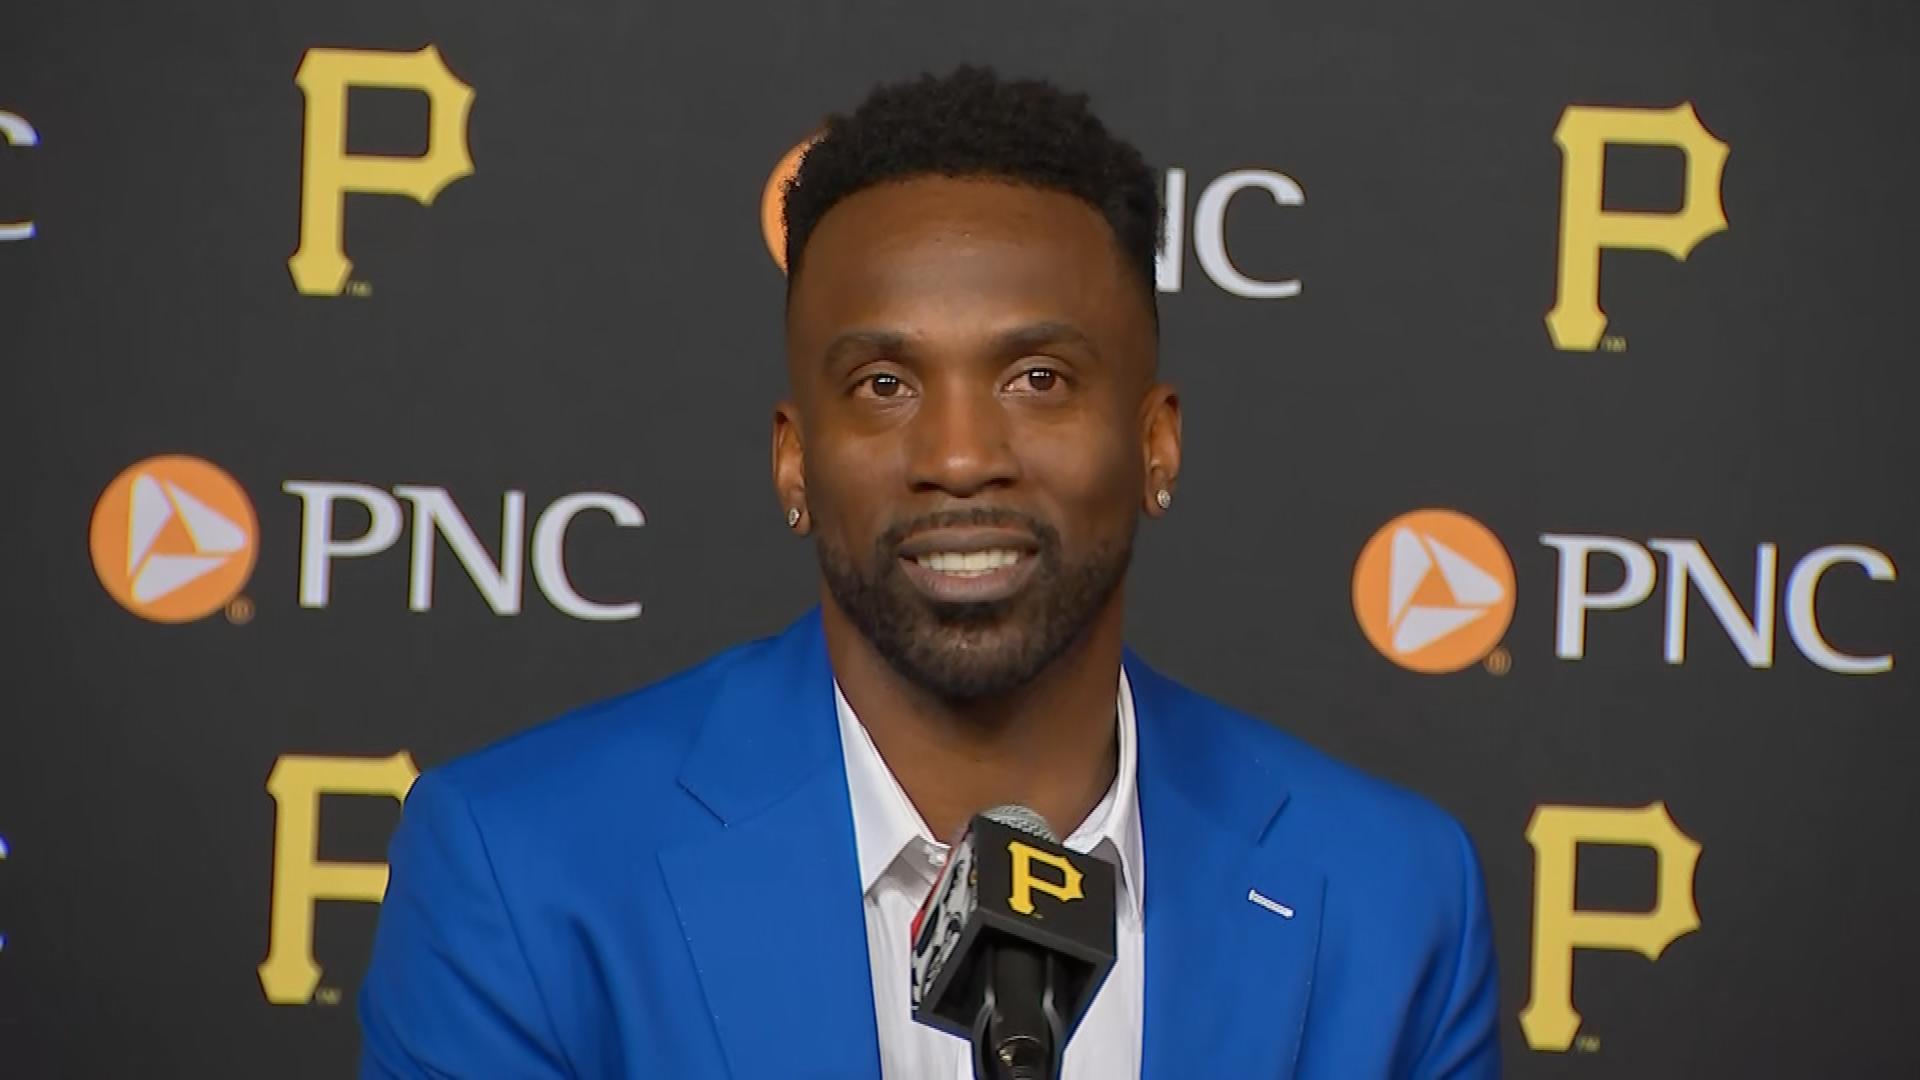 Report: Andrew McCutchen returning to Pirates on 1-year deal - NBC Sports